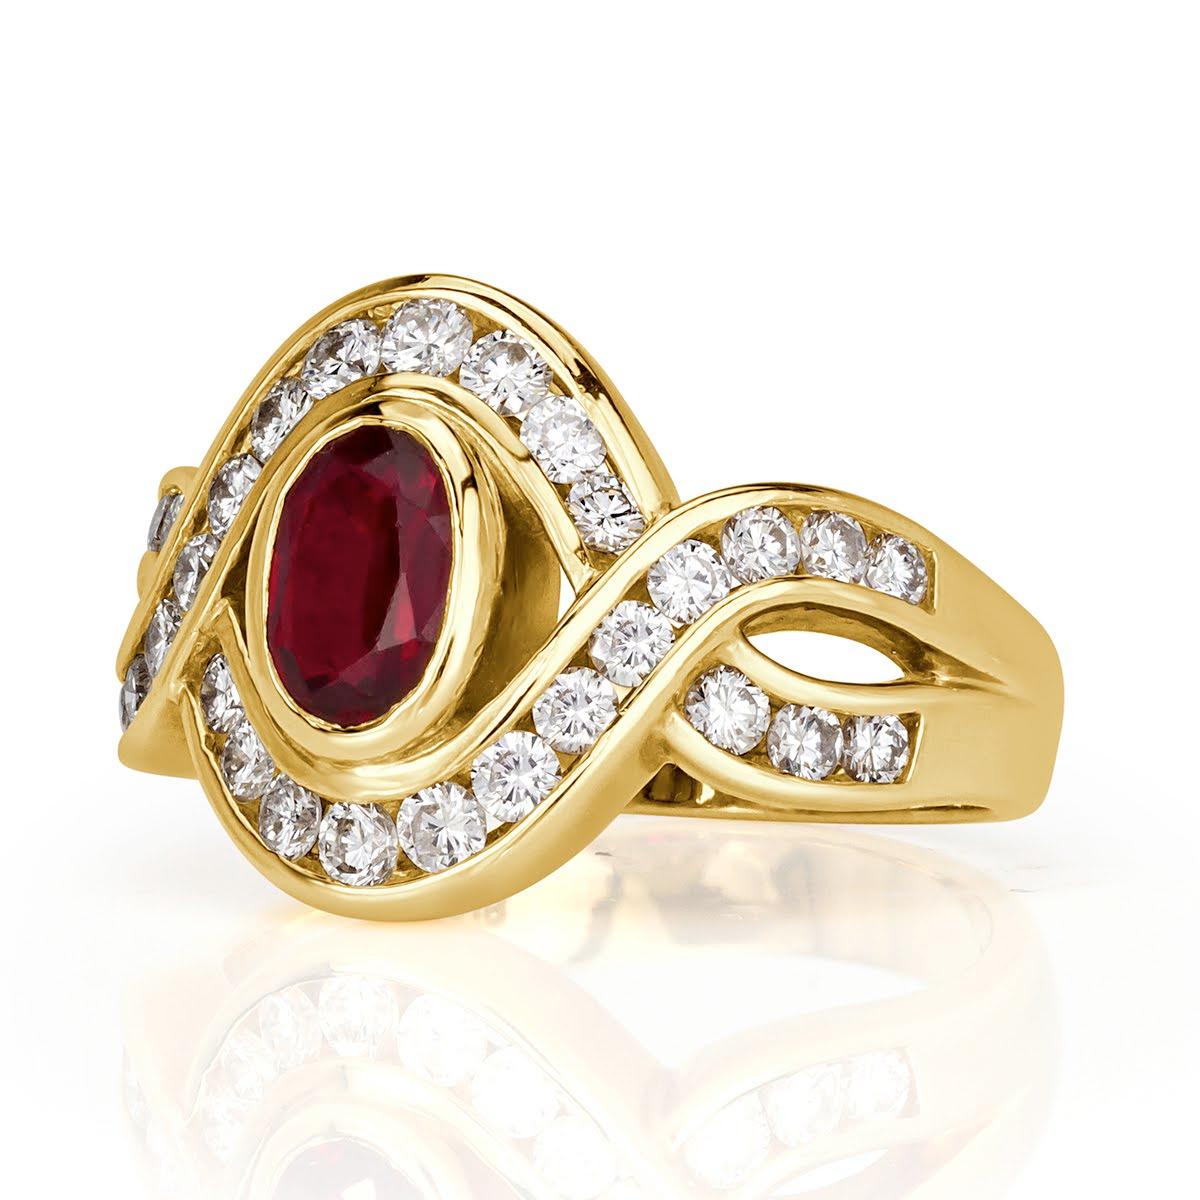 Created in 18k yellow gold, this ravishing vintage ring showcases a 0.94ct oval cut center ruby accented by 0.78ct of round brilliant cut diamonds set on the unique shank design. It sits lovely on the finger!
